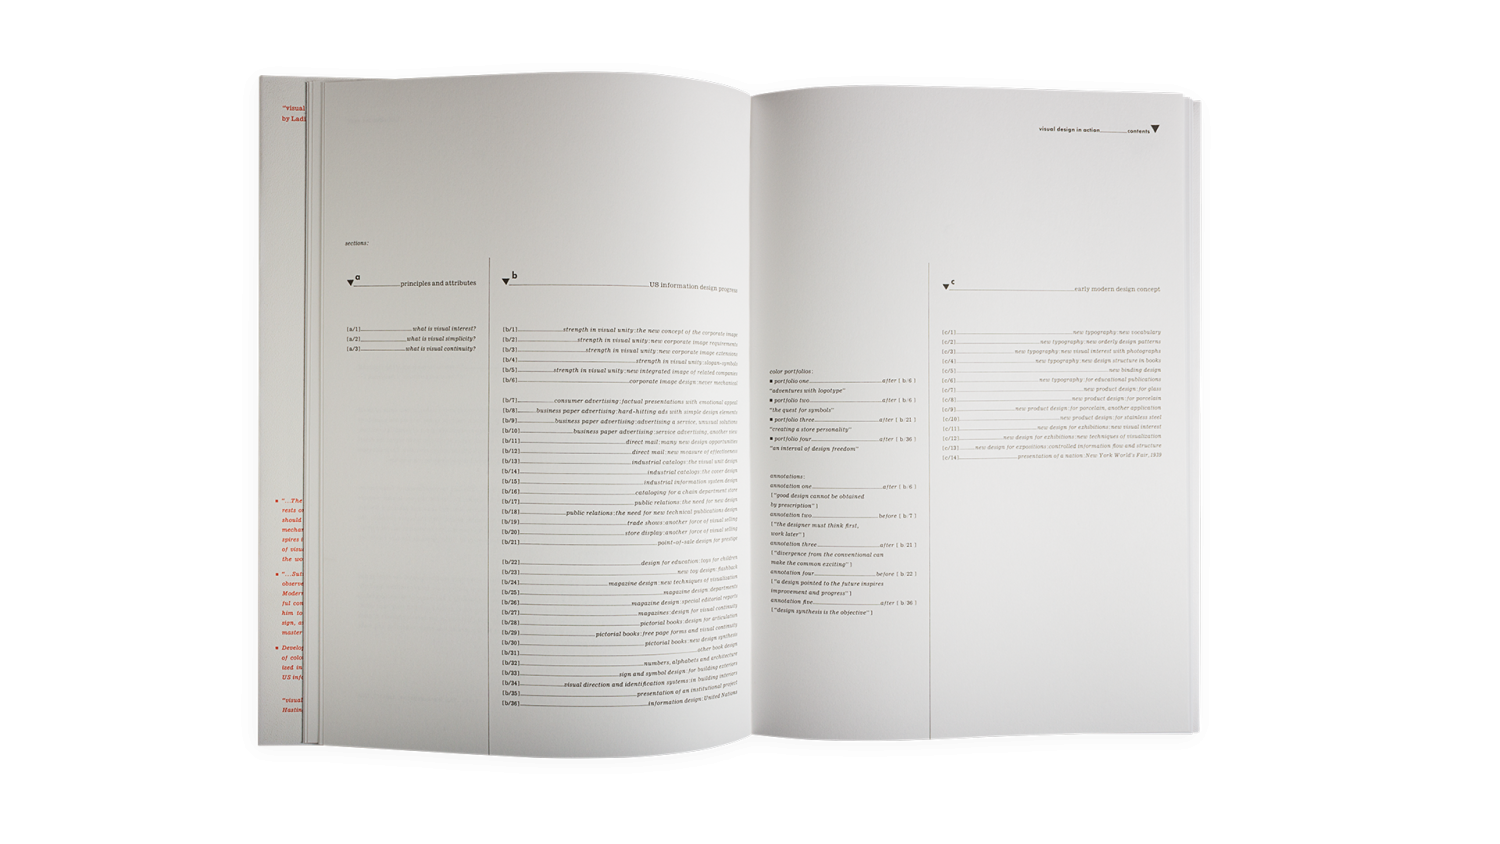 Sutnar’s table of contents uses a system of letters and numbers, rather than pages.